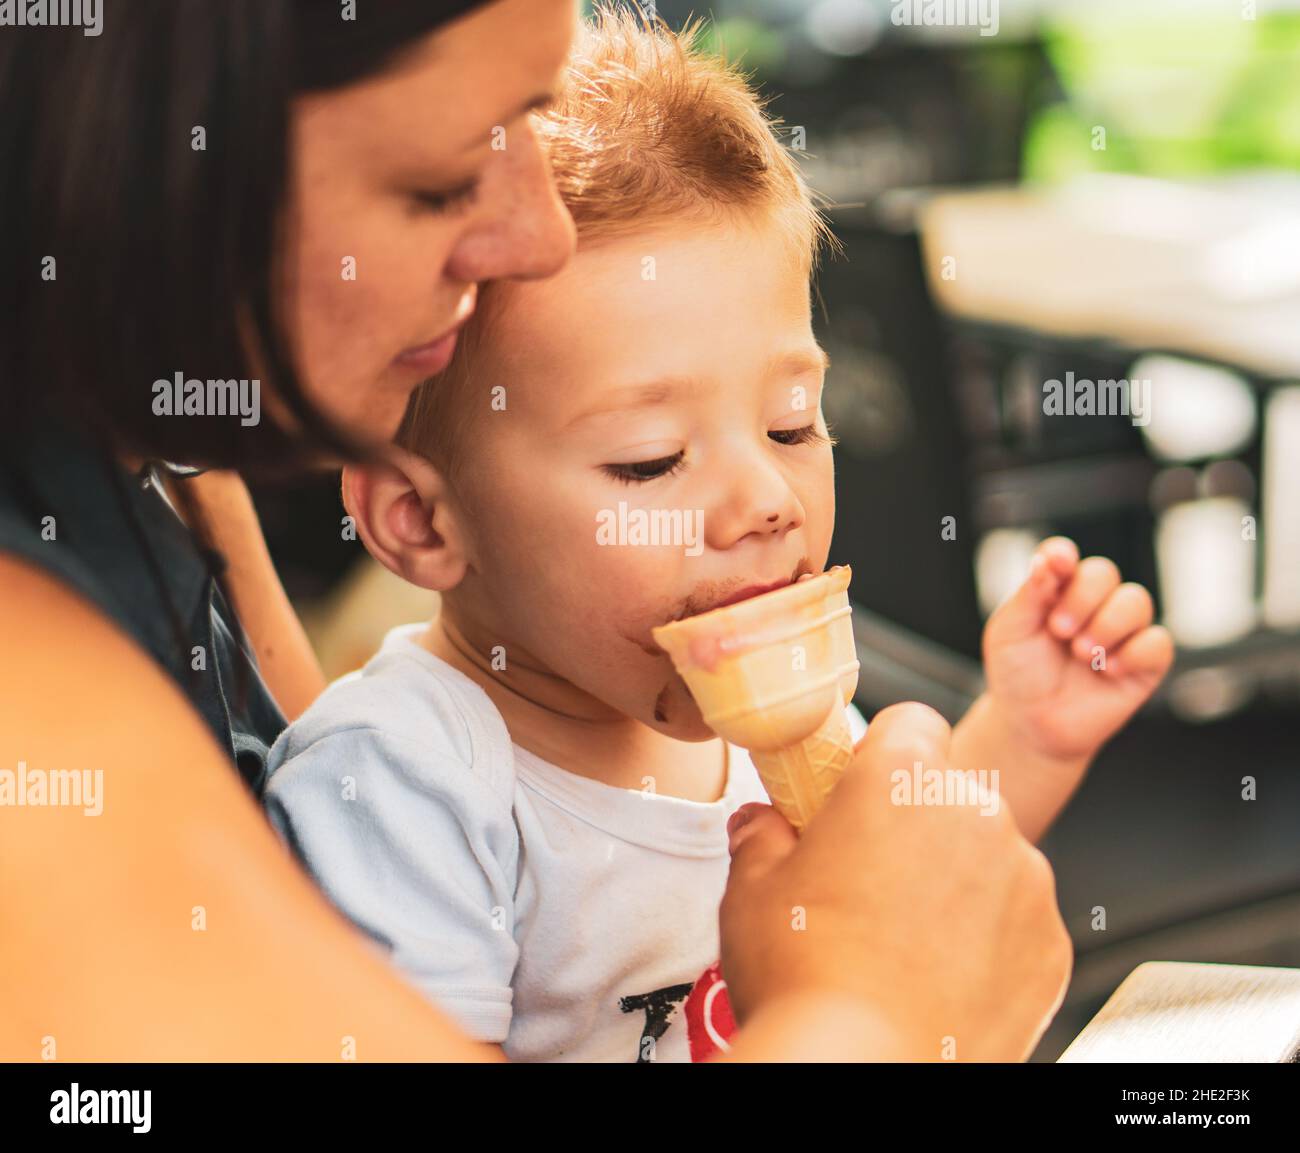 Closeup shot of a young boy and woman eating ice cream at a bar Stock Photo